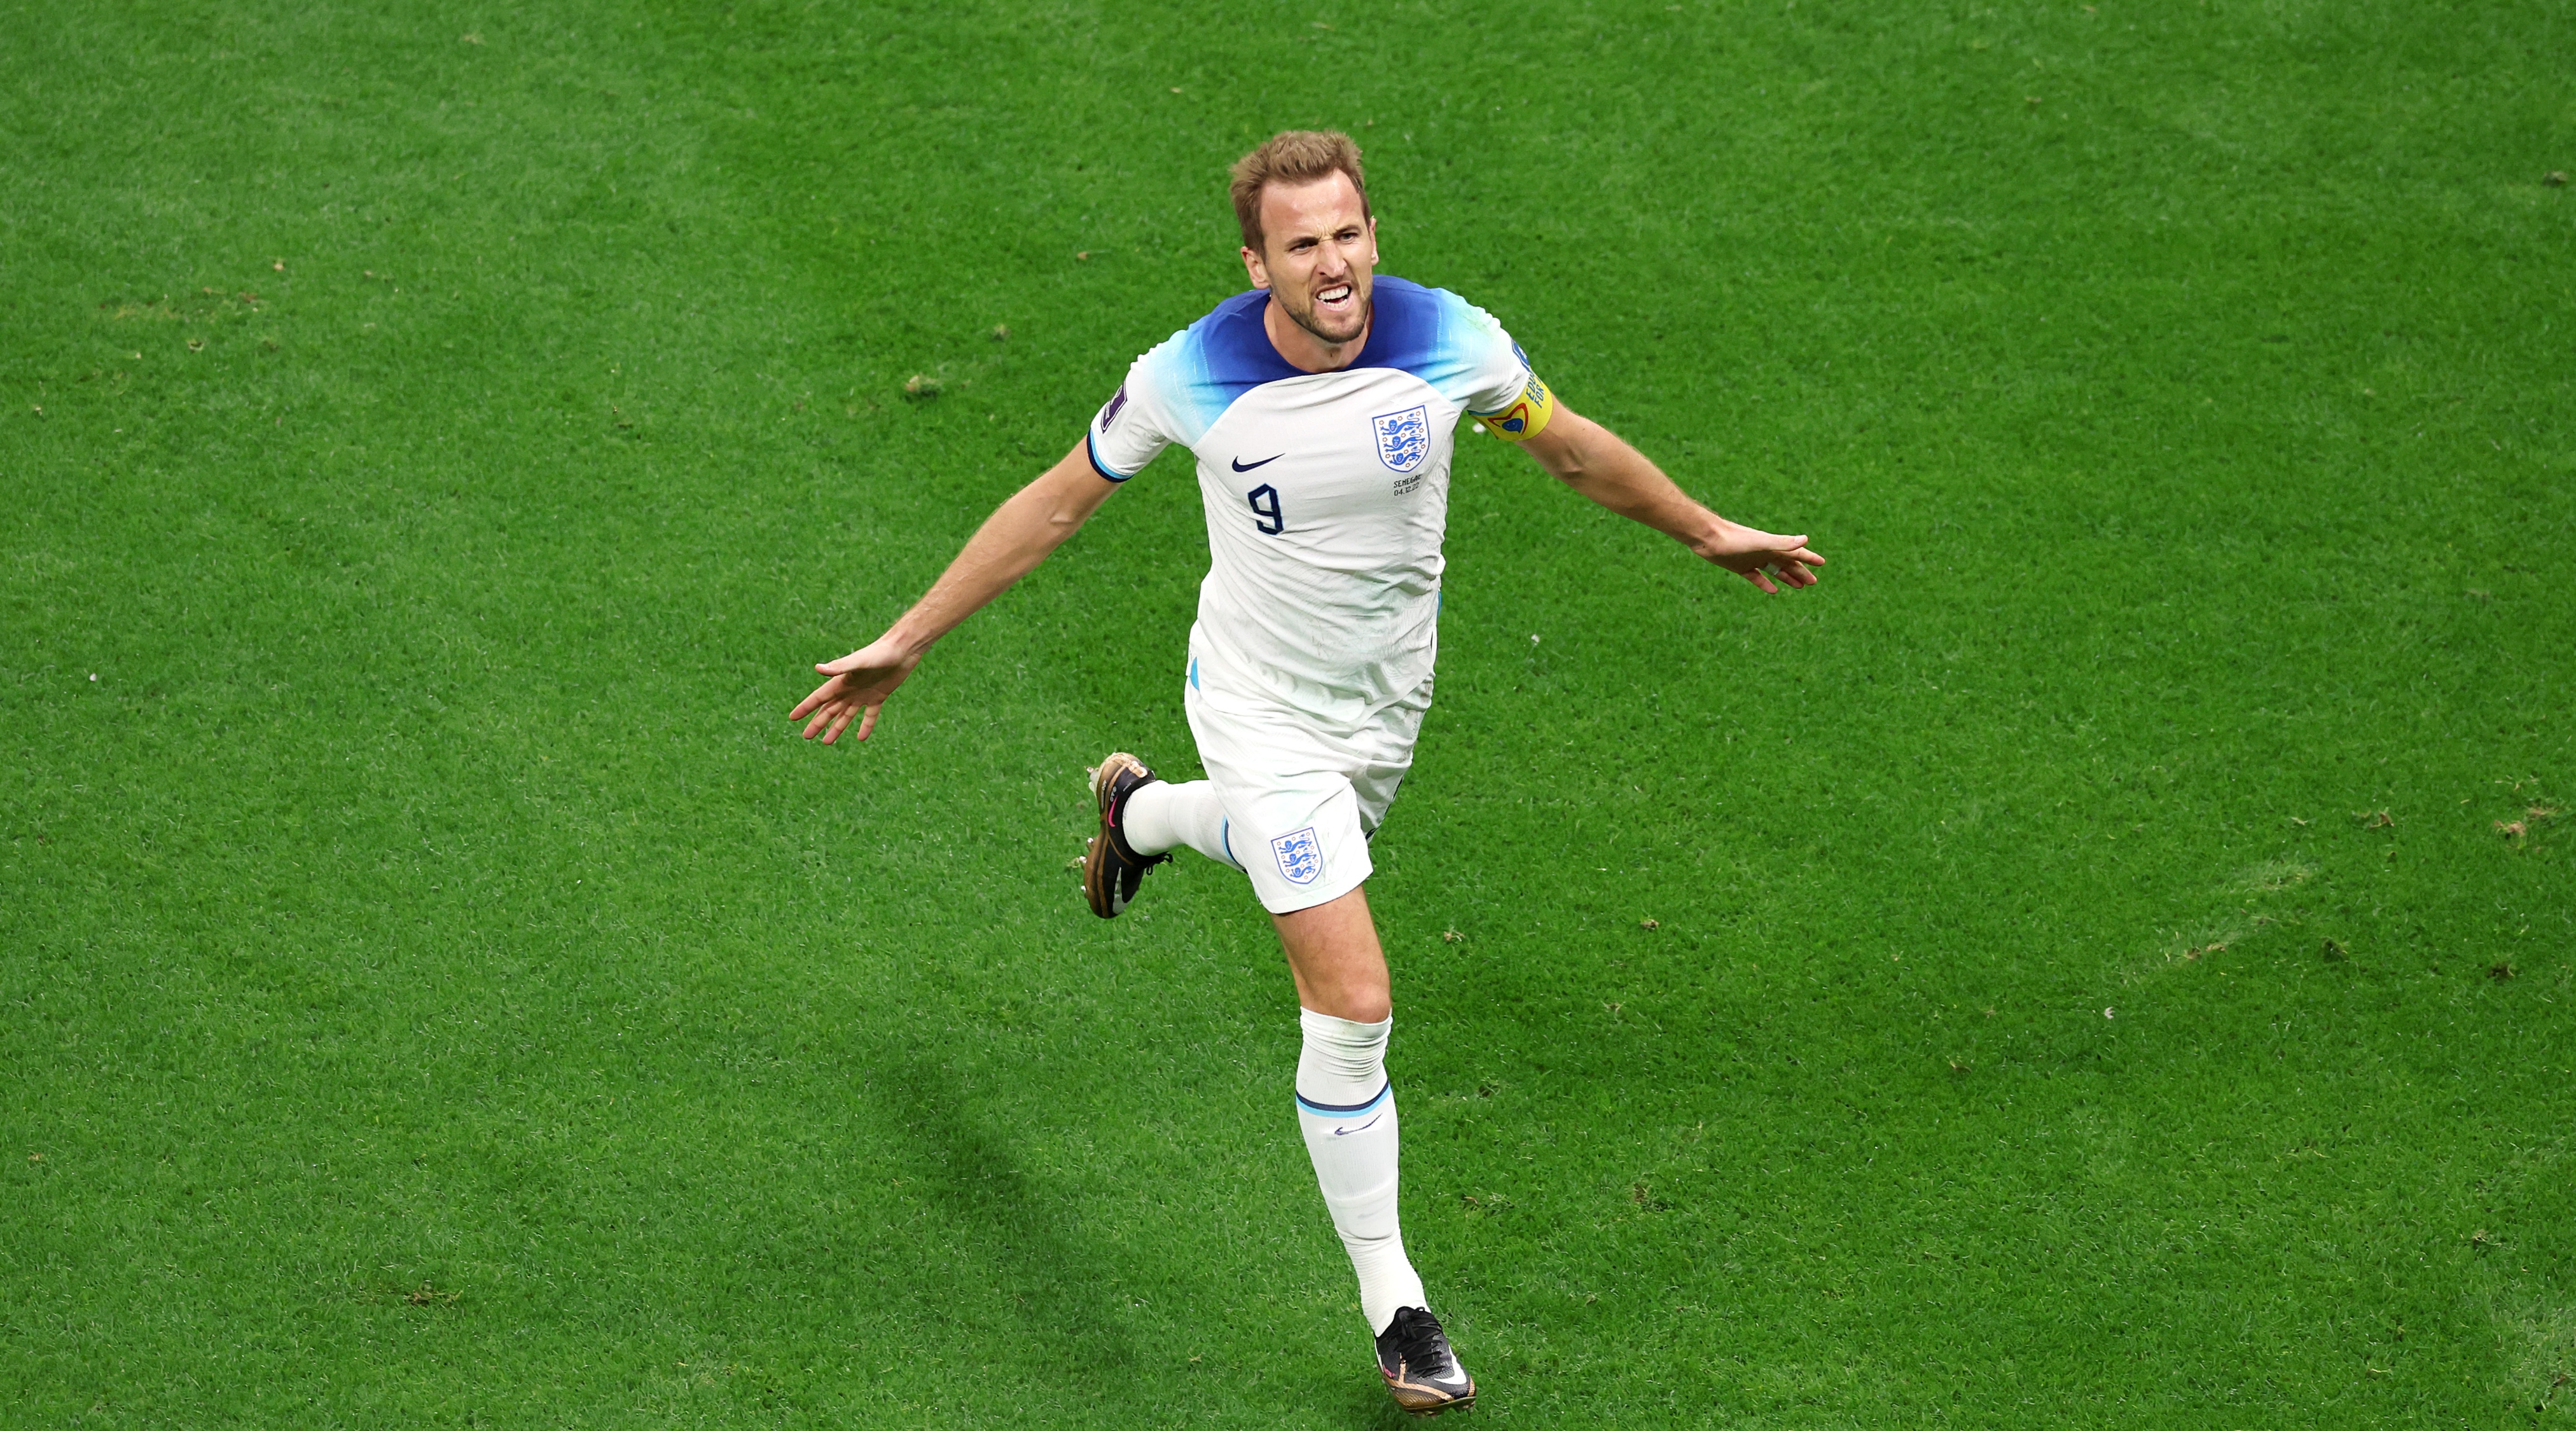 Harry Kane of England celebrates after scoring his country's second goal during the FIFA World Cup 2022 quarter-final match between England and Senegal at Al Bayt Stadium on 4 December, 2022 in Al Khor, Qatar.